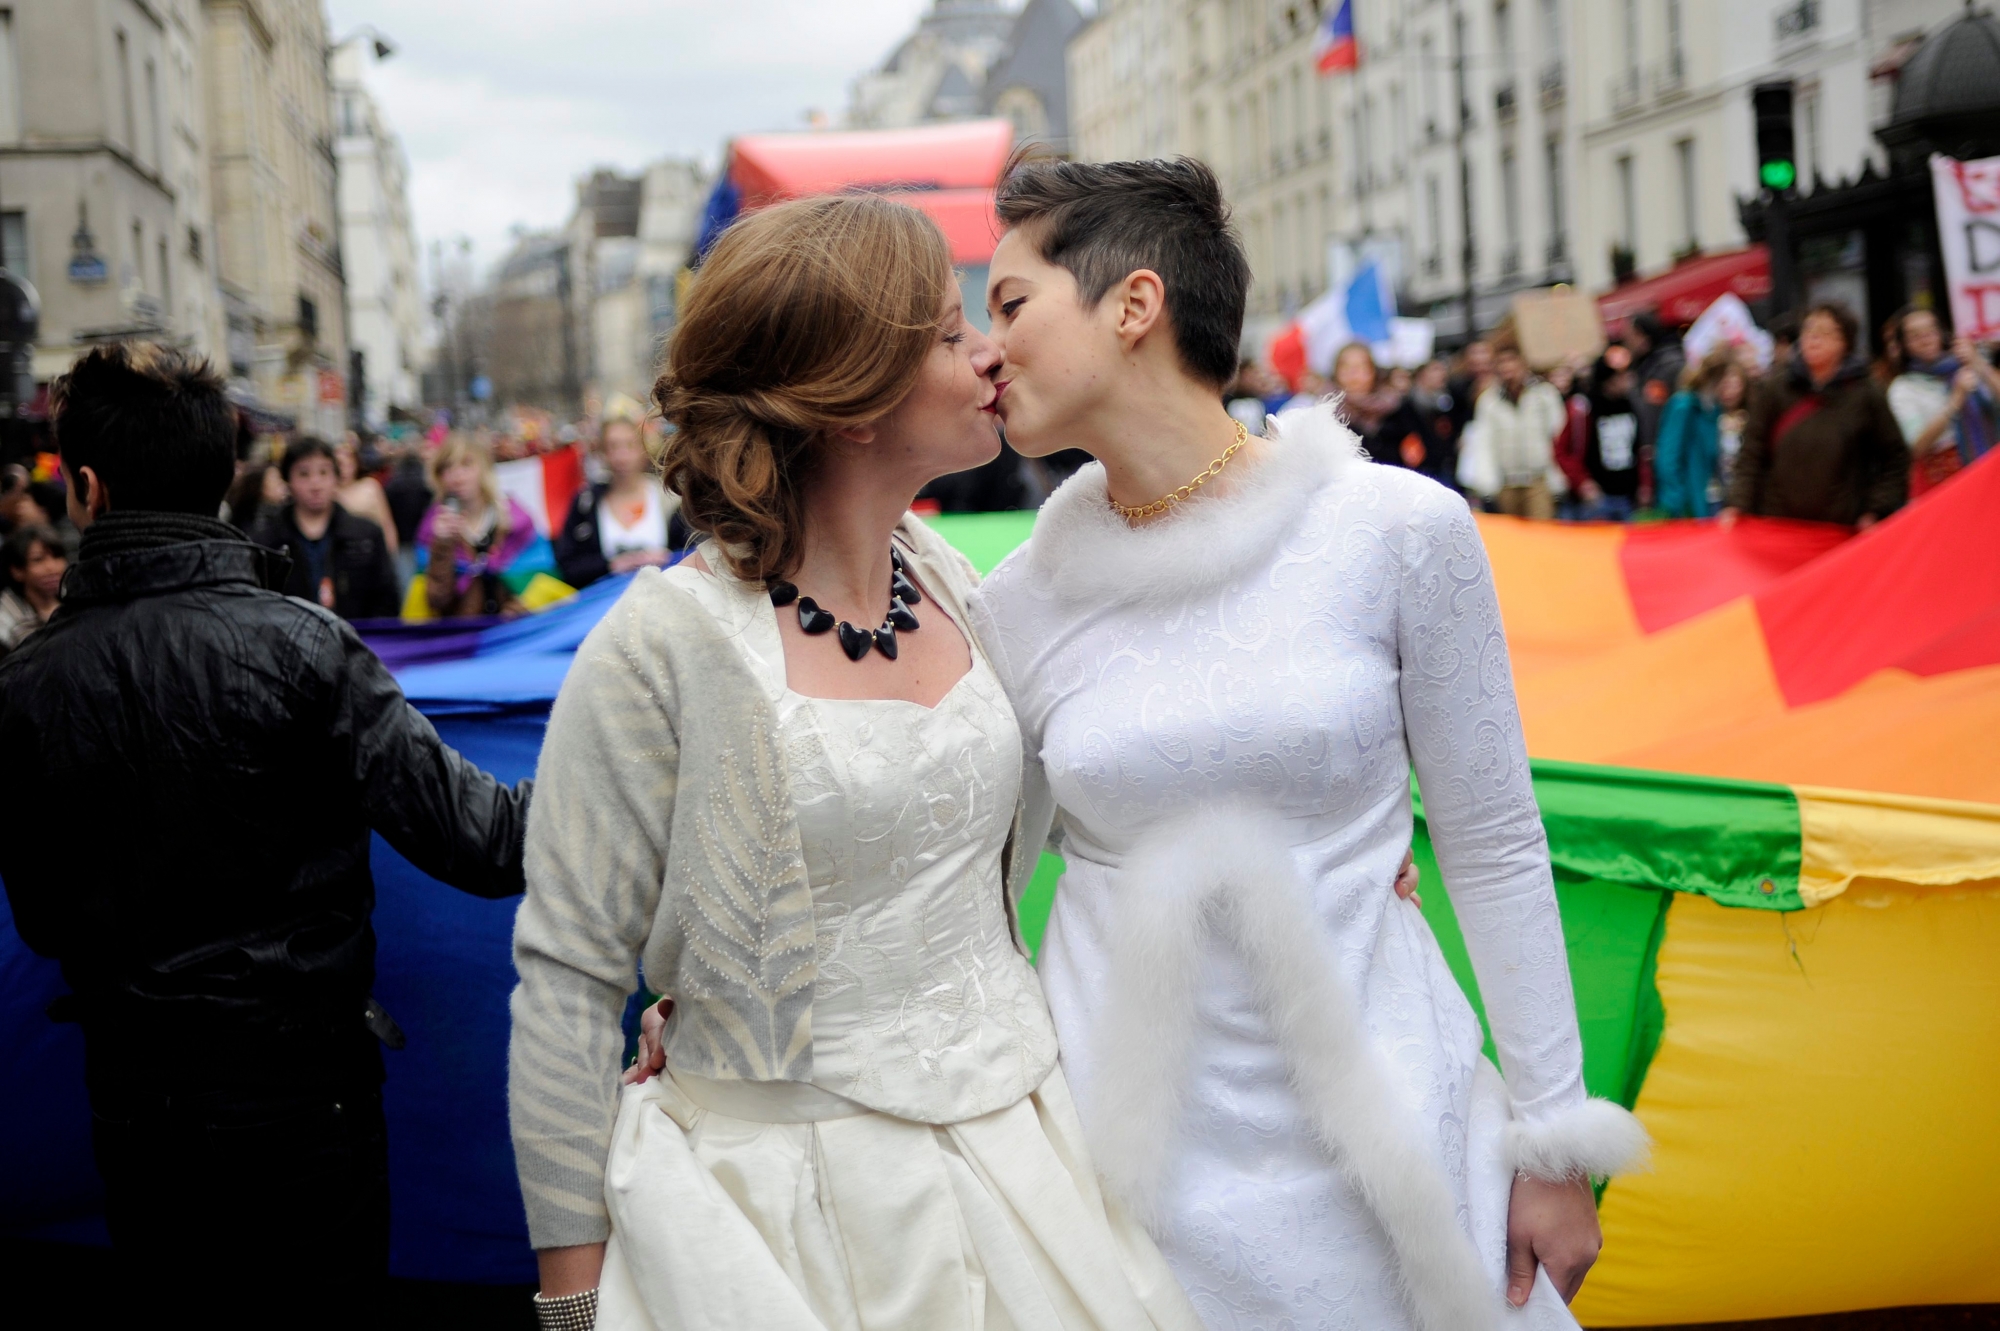 epa03511242 A female couple share a kiss during a demonstration in favour of legalizing gay marriage in Paris, France, 16 December 2012. According to media reports, tens of thousands of people demonstrated 16 December in France in favour of gay marriage, a week after more than 100,000 took to the streets to oppose government moves in that direction.  EPA/YOAN VALAT FRANCE PROTEST GAY MARRIAGE